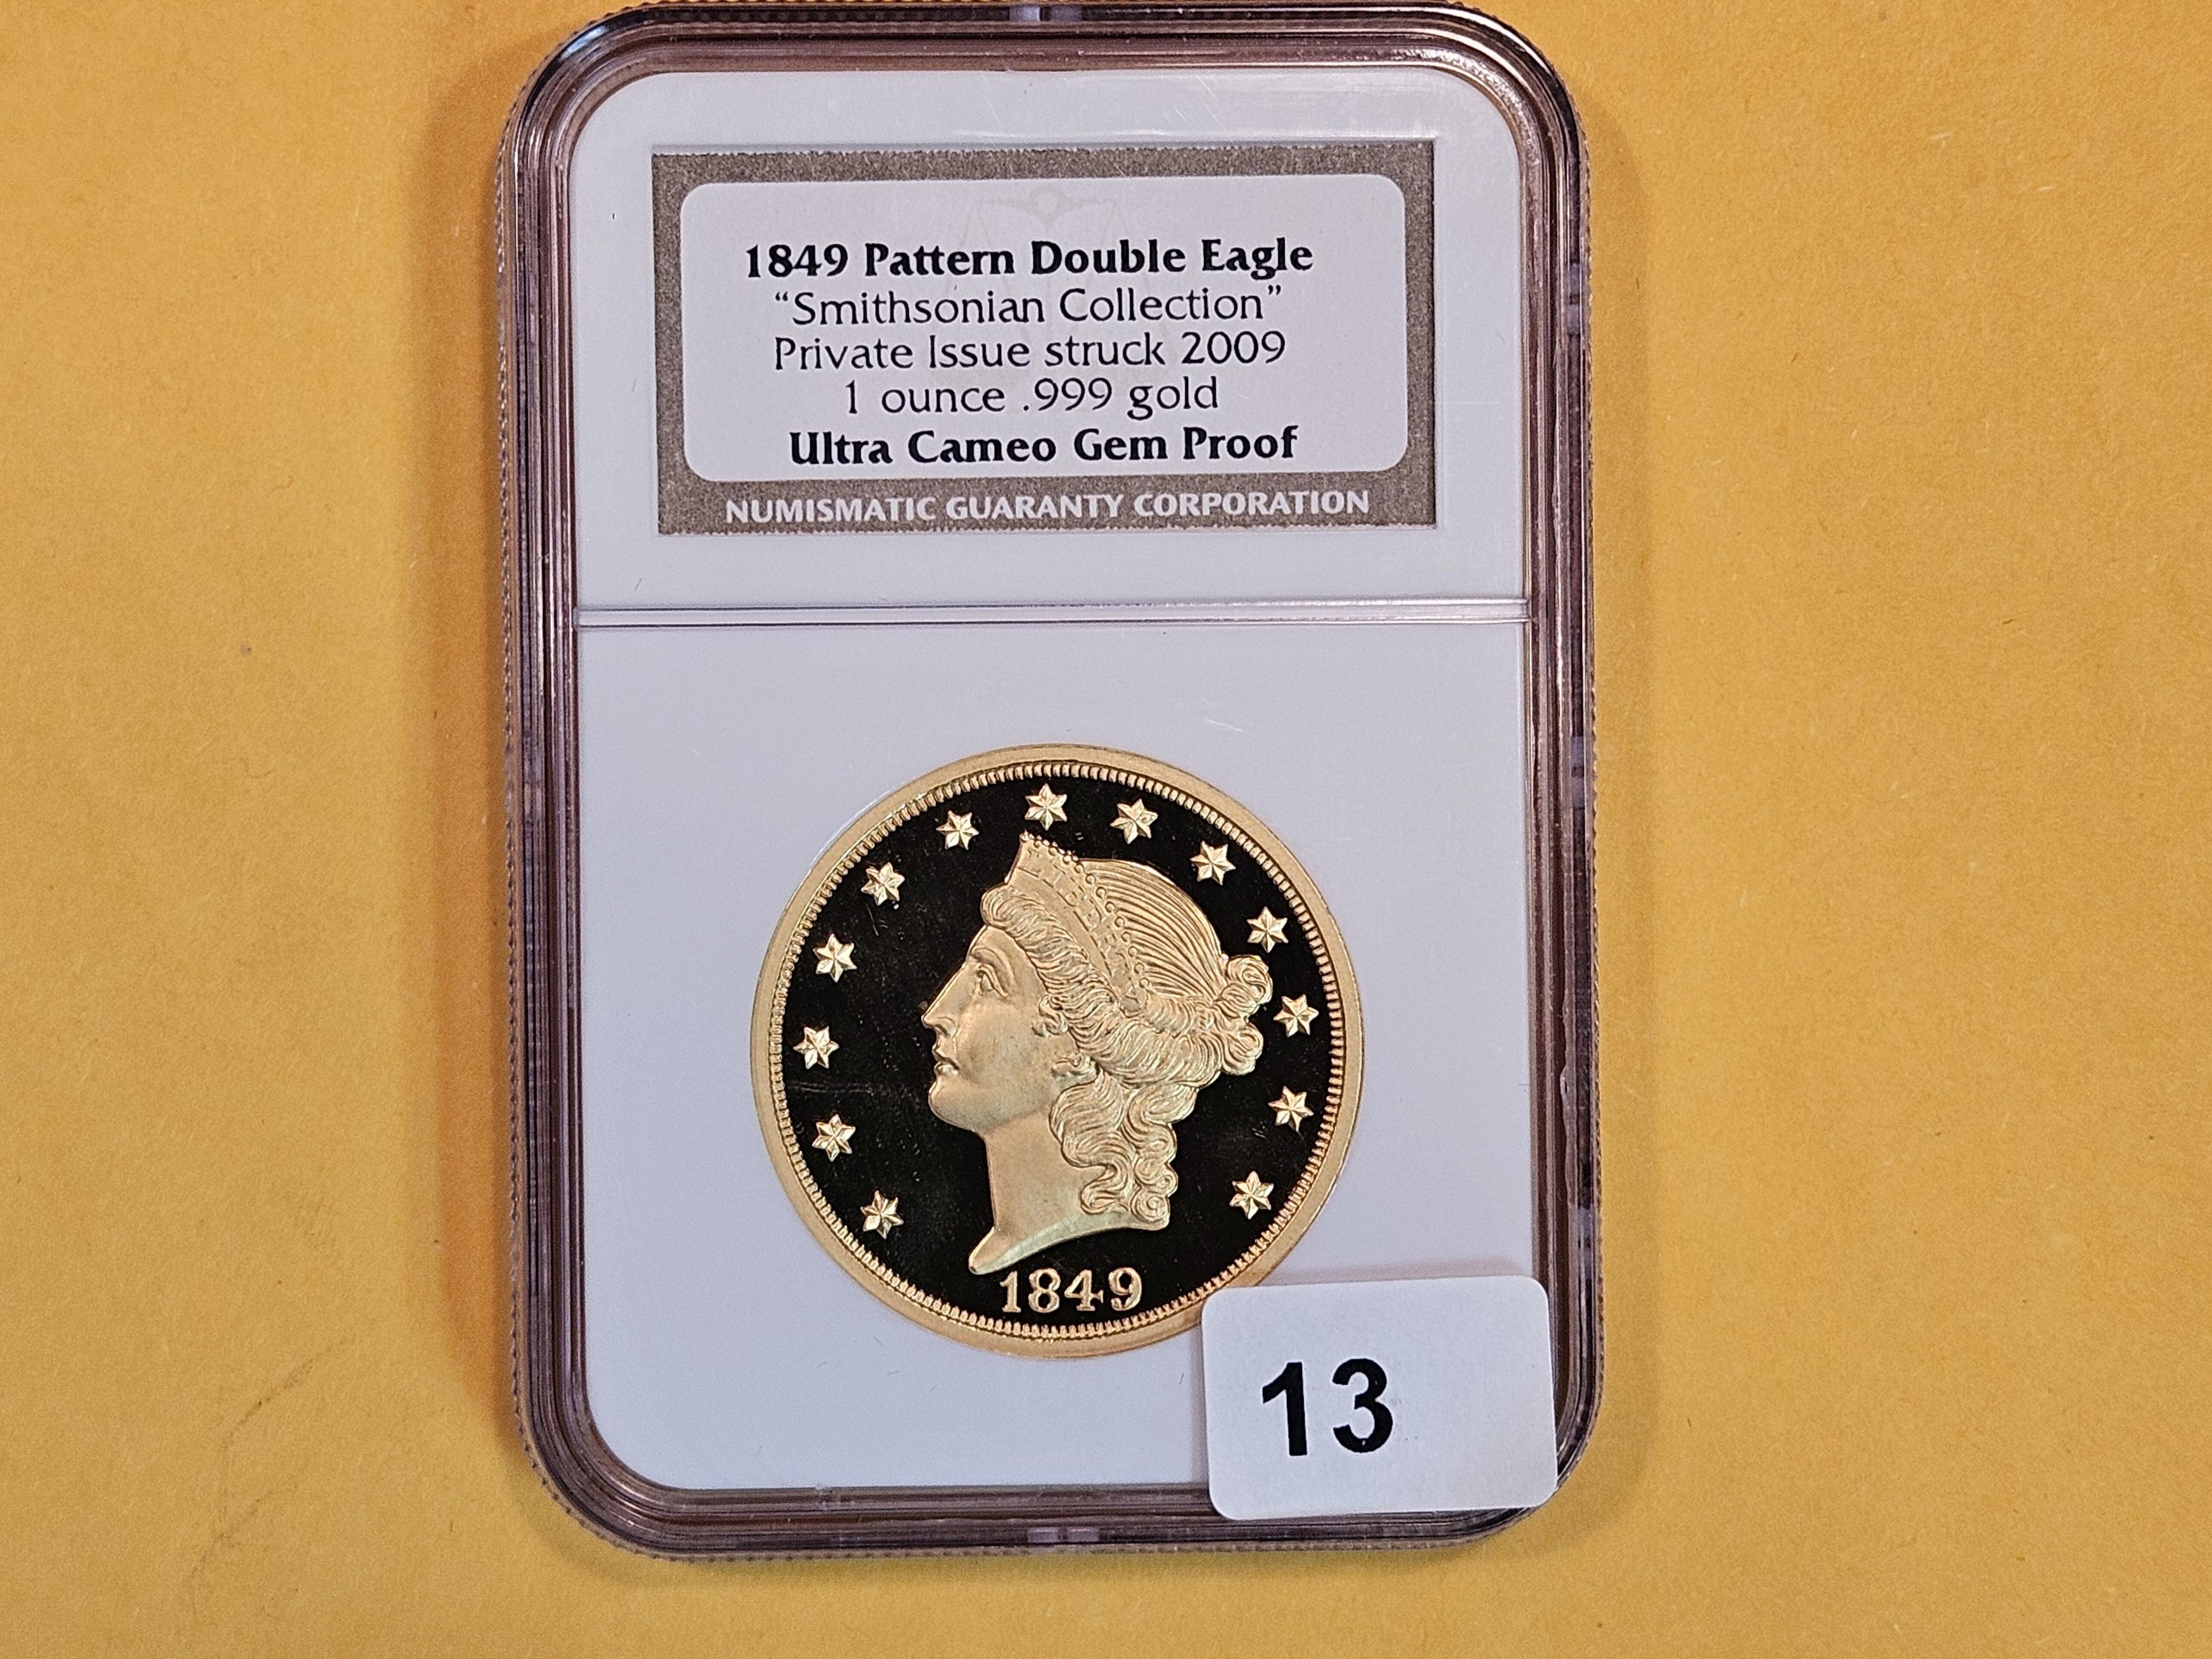 GOLD! NGC 1849 Pattern Double Eagle in Ultra Cameo GEM Proof